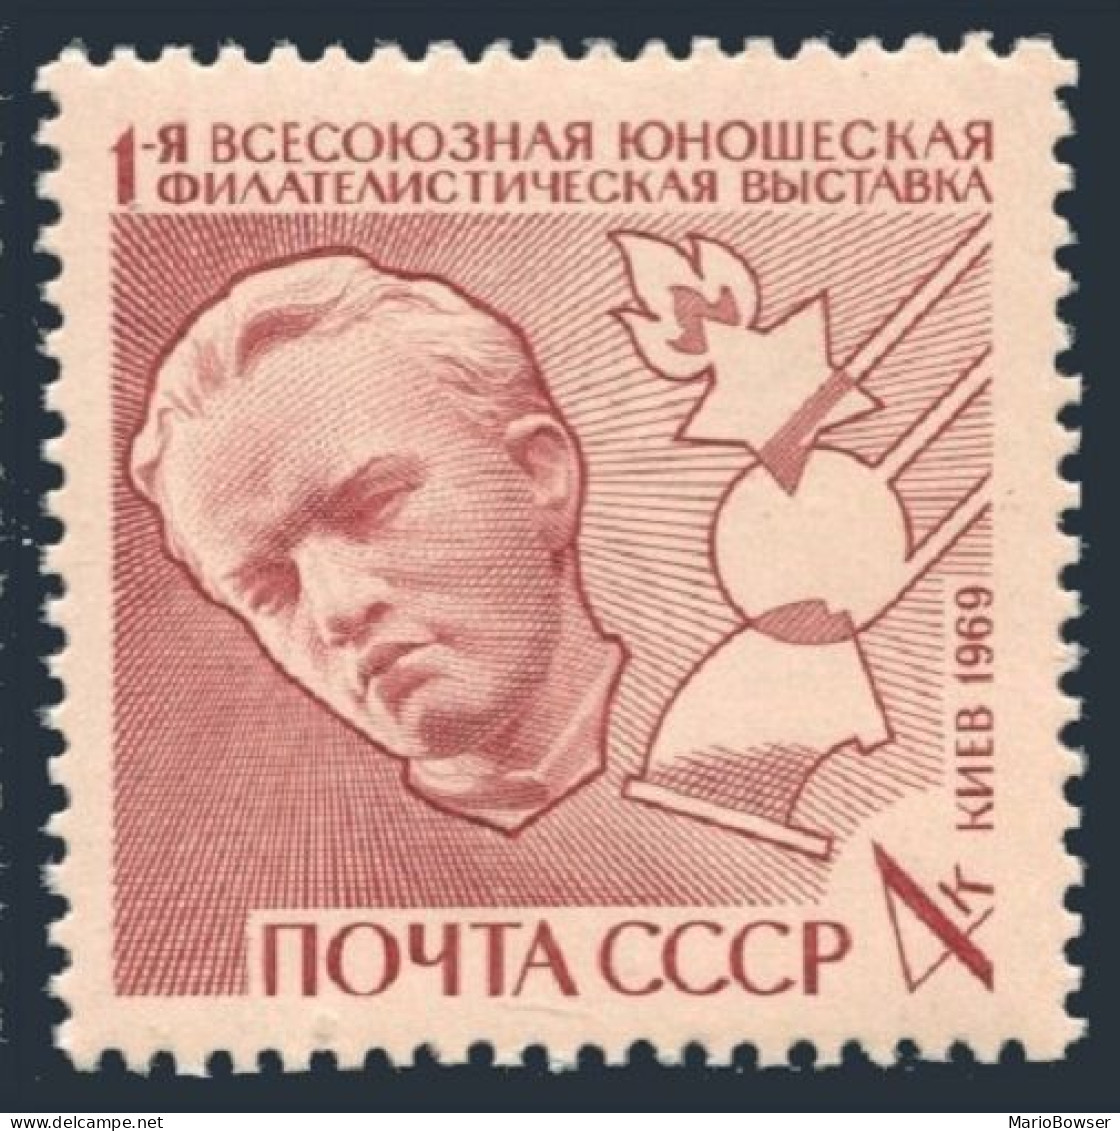 Russia 3658 Two Stamps, MNH. Mi 3685. Soviet Youth Philatelic Exhibition, 1969. - Unused Stamps